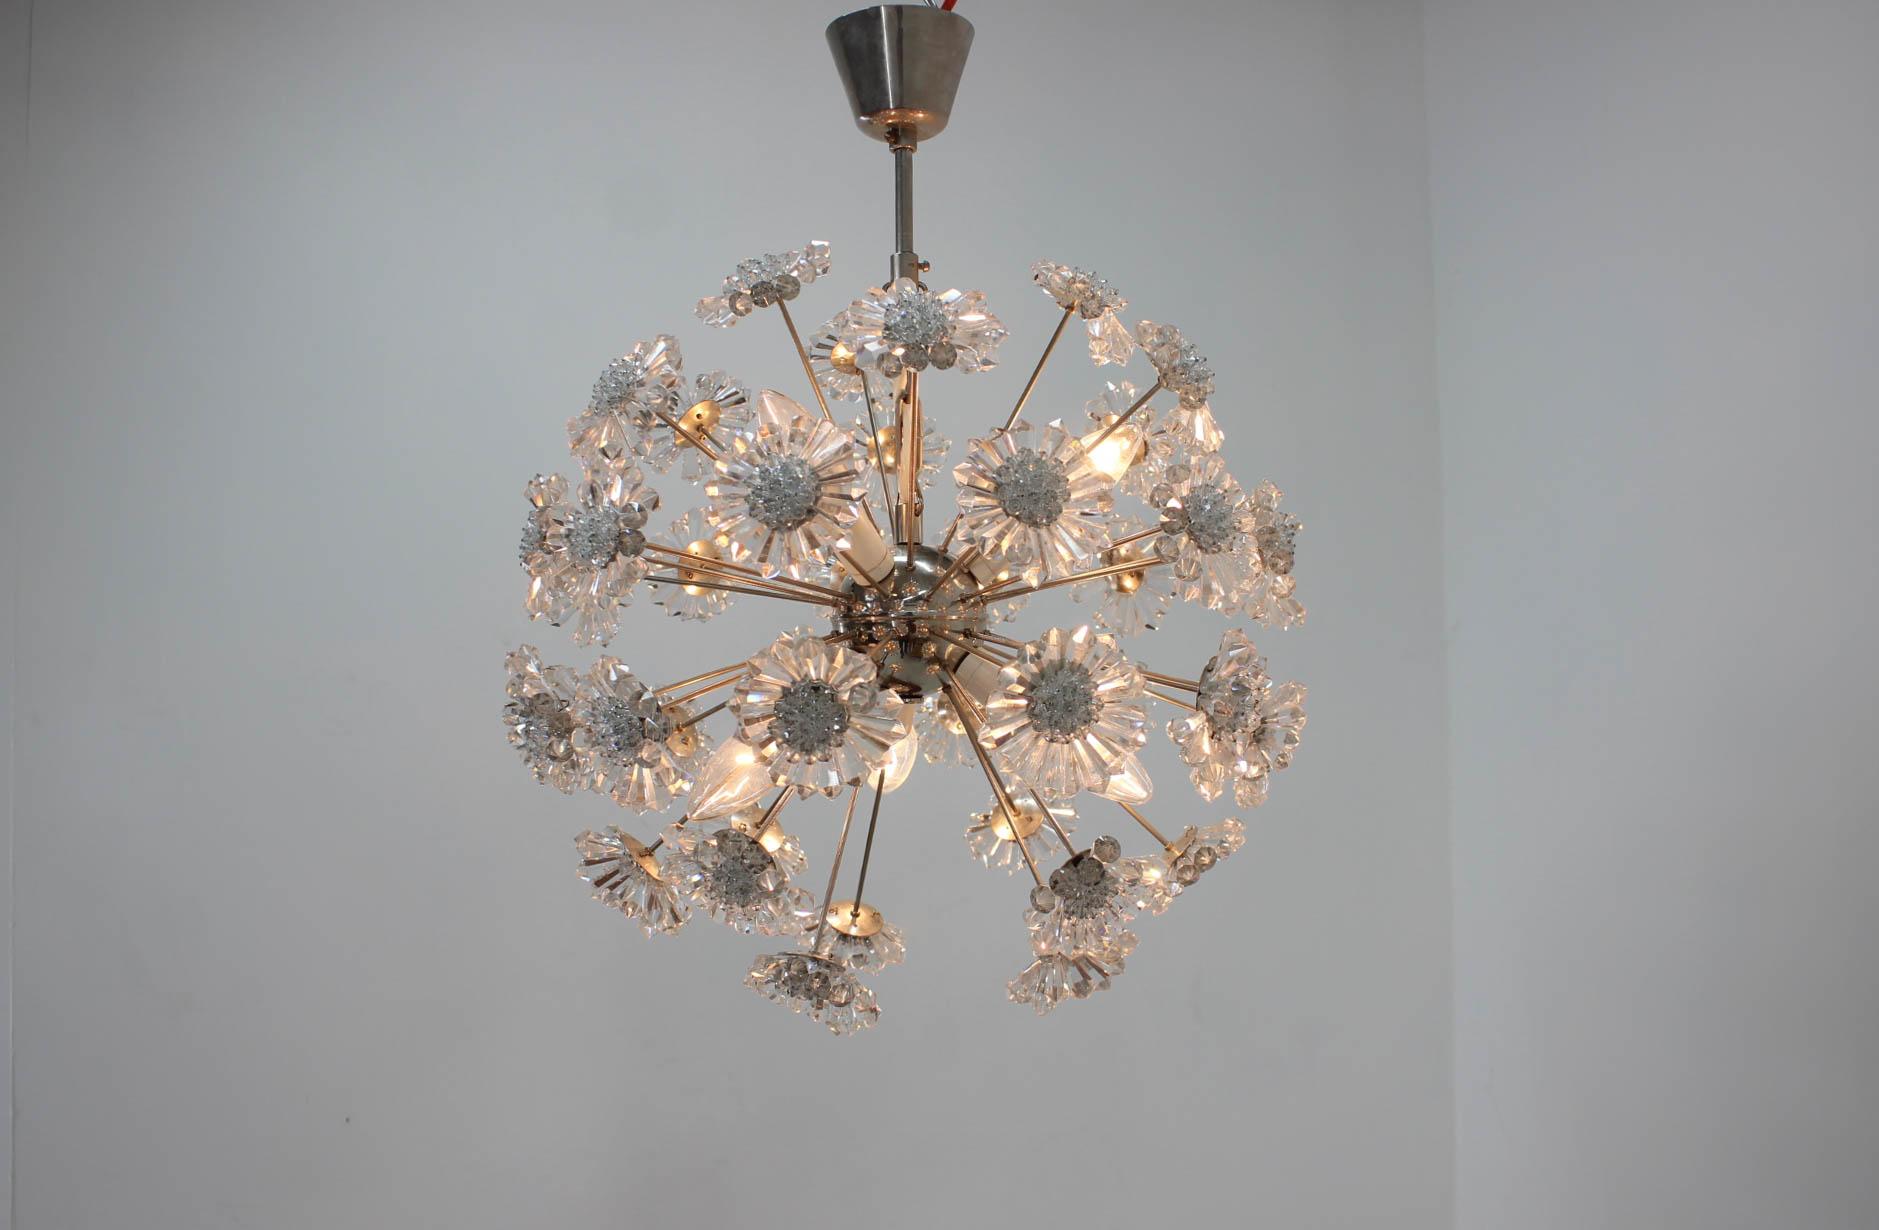 Dandelion chandelier made by Preciosa in 1970. Restored. Carefully cleaned. Very good condition. E14 bulbs.